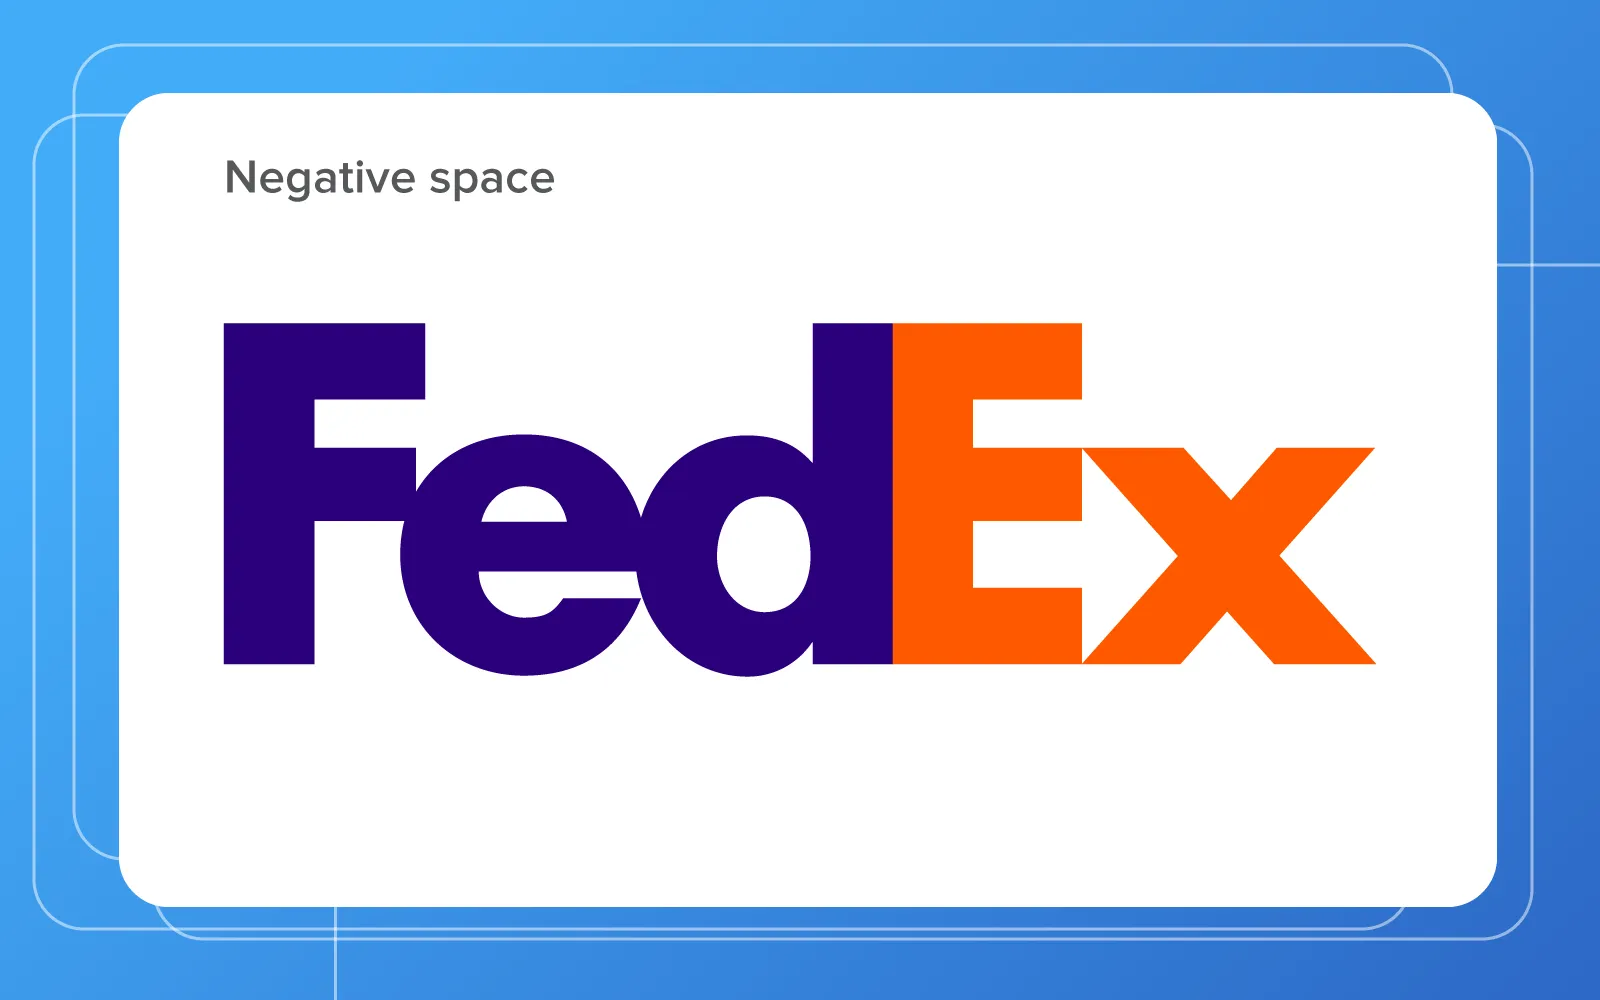 New logo design trends and the use of negative space on business logo examples